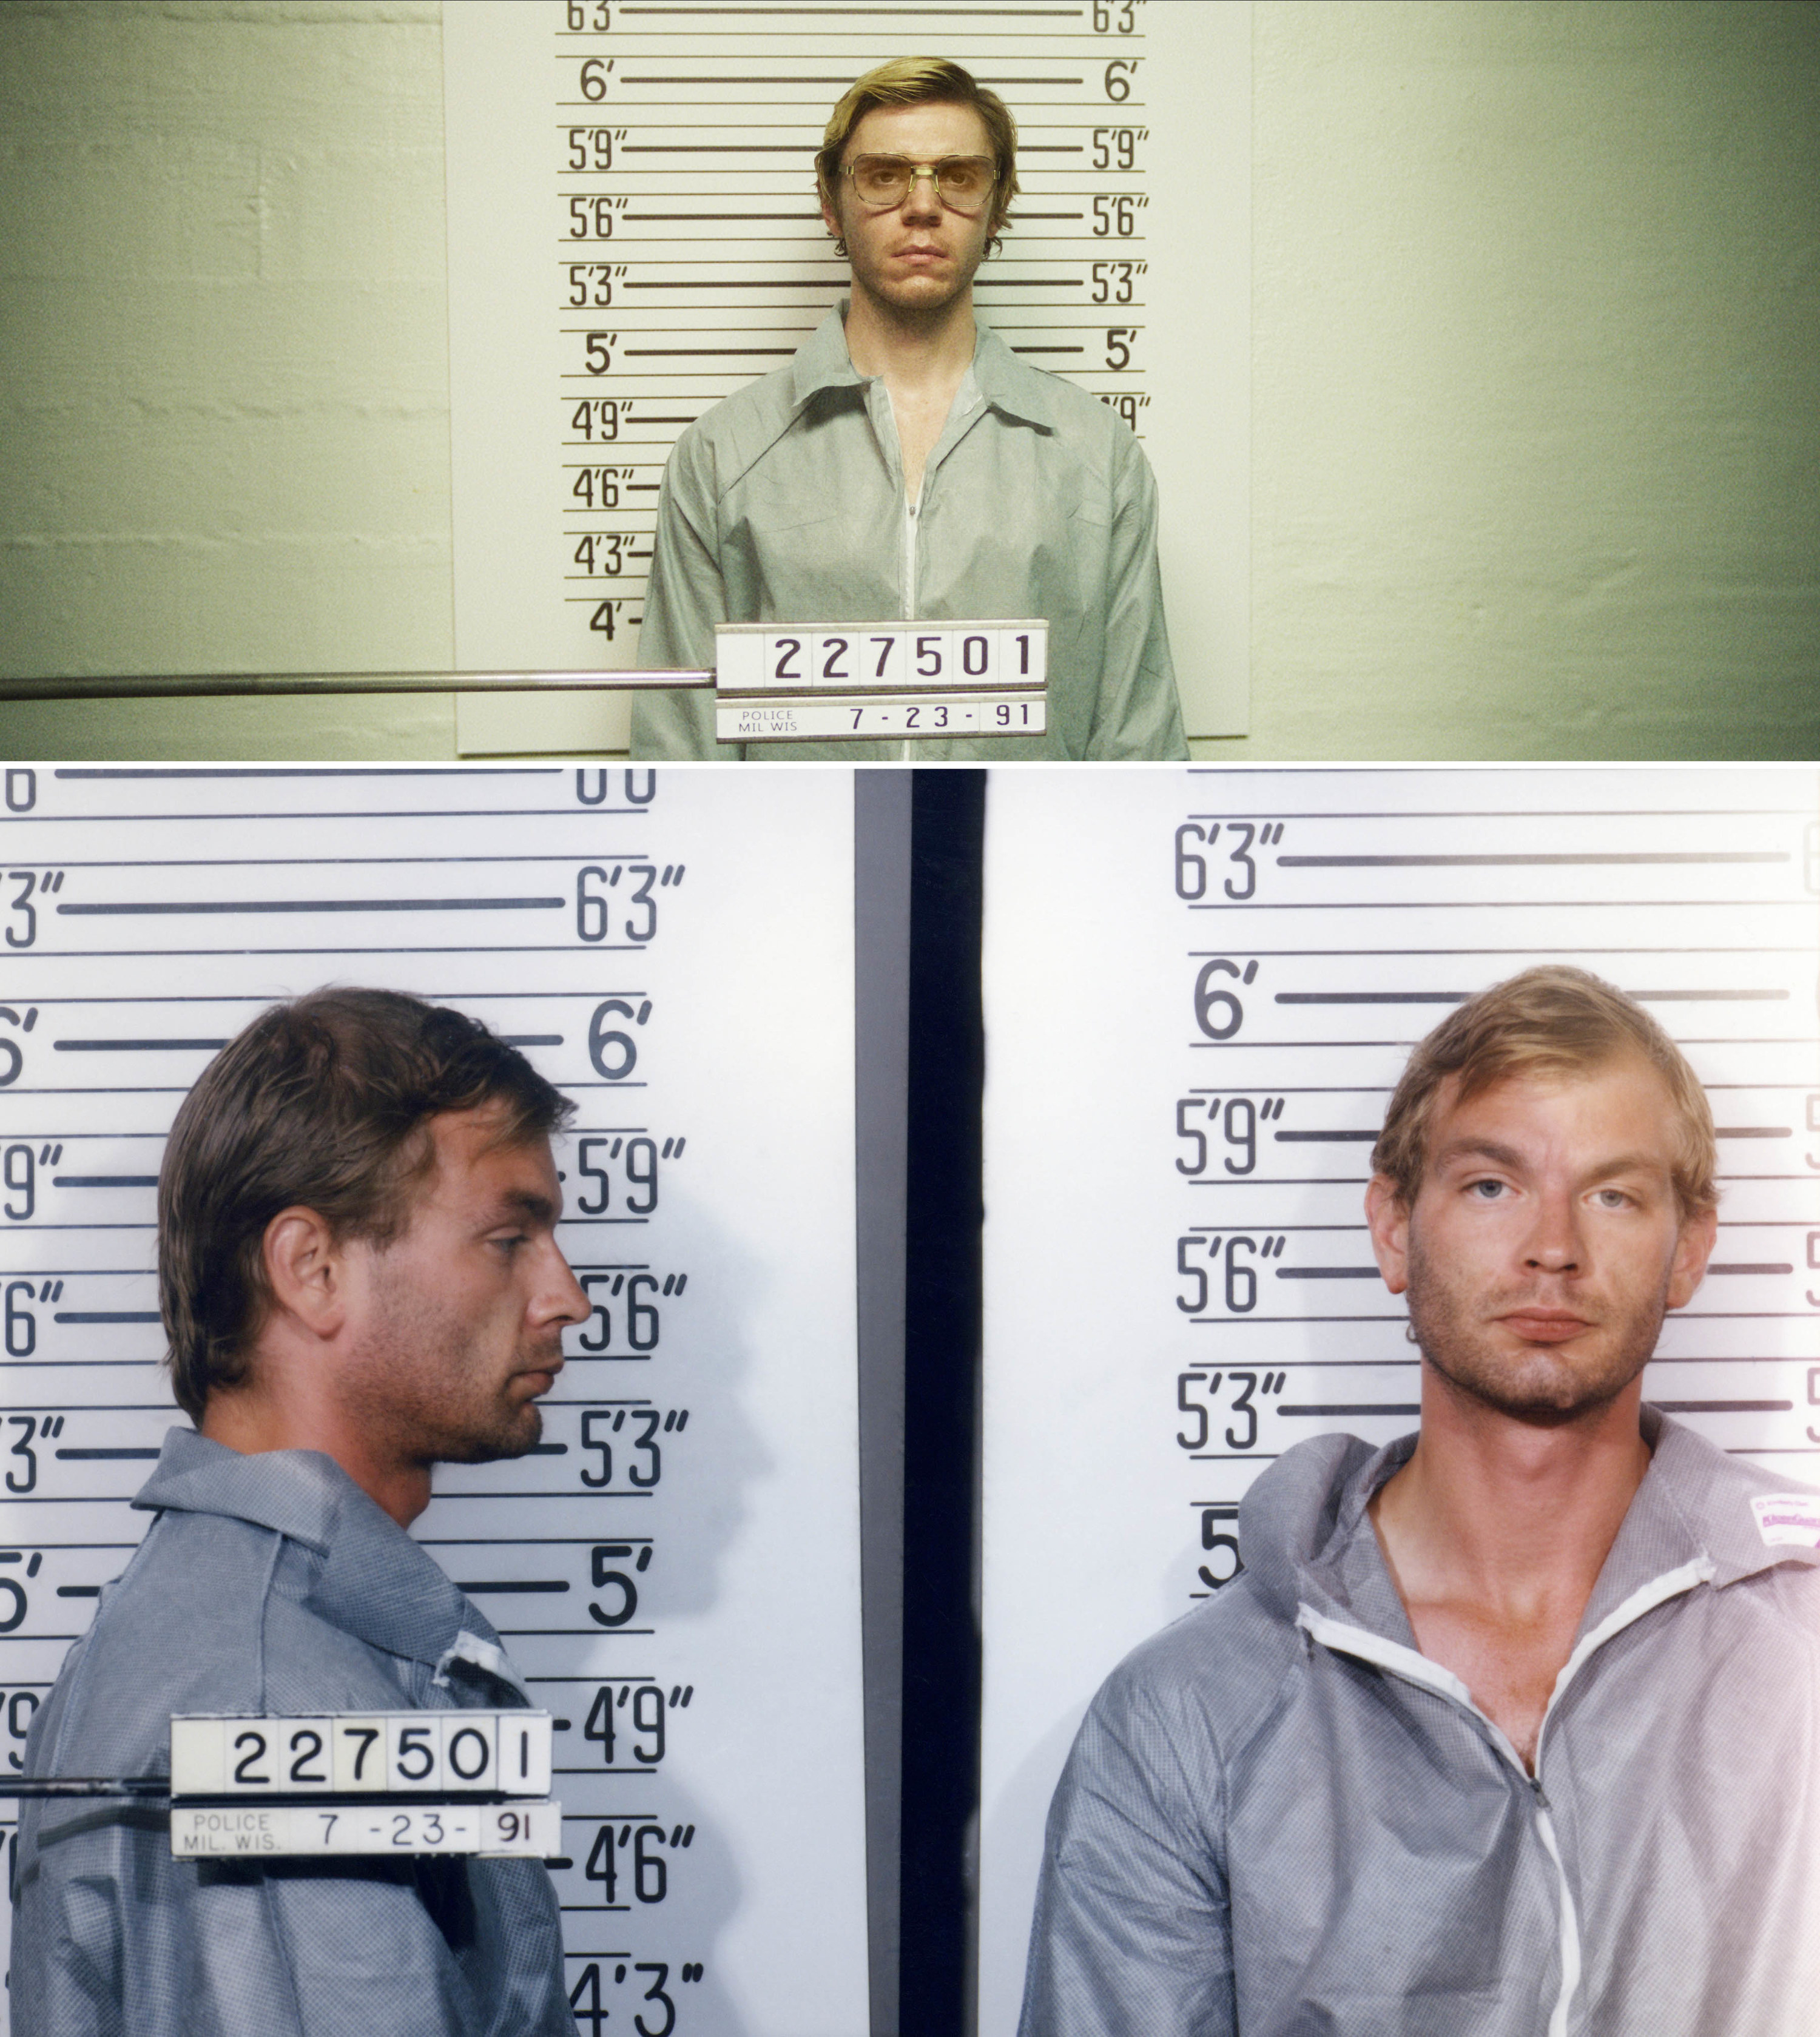 Evan as Jeffrey getting a mugshot vs the real Jeffrey&#x27;s mugshot; their height is the same, and they share the same emotionless expression